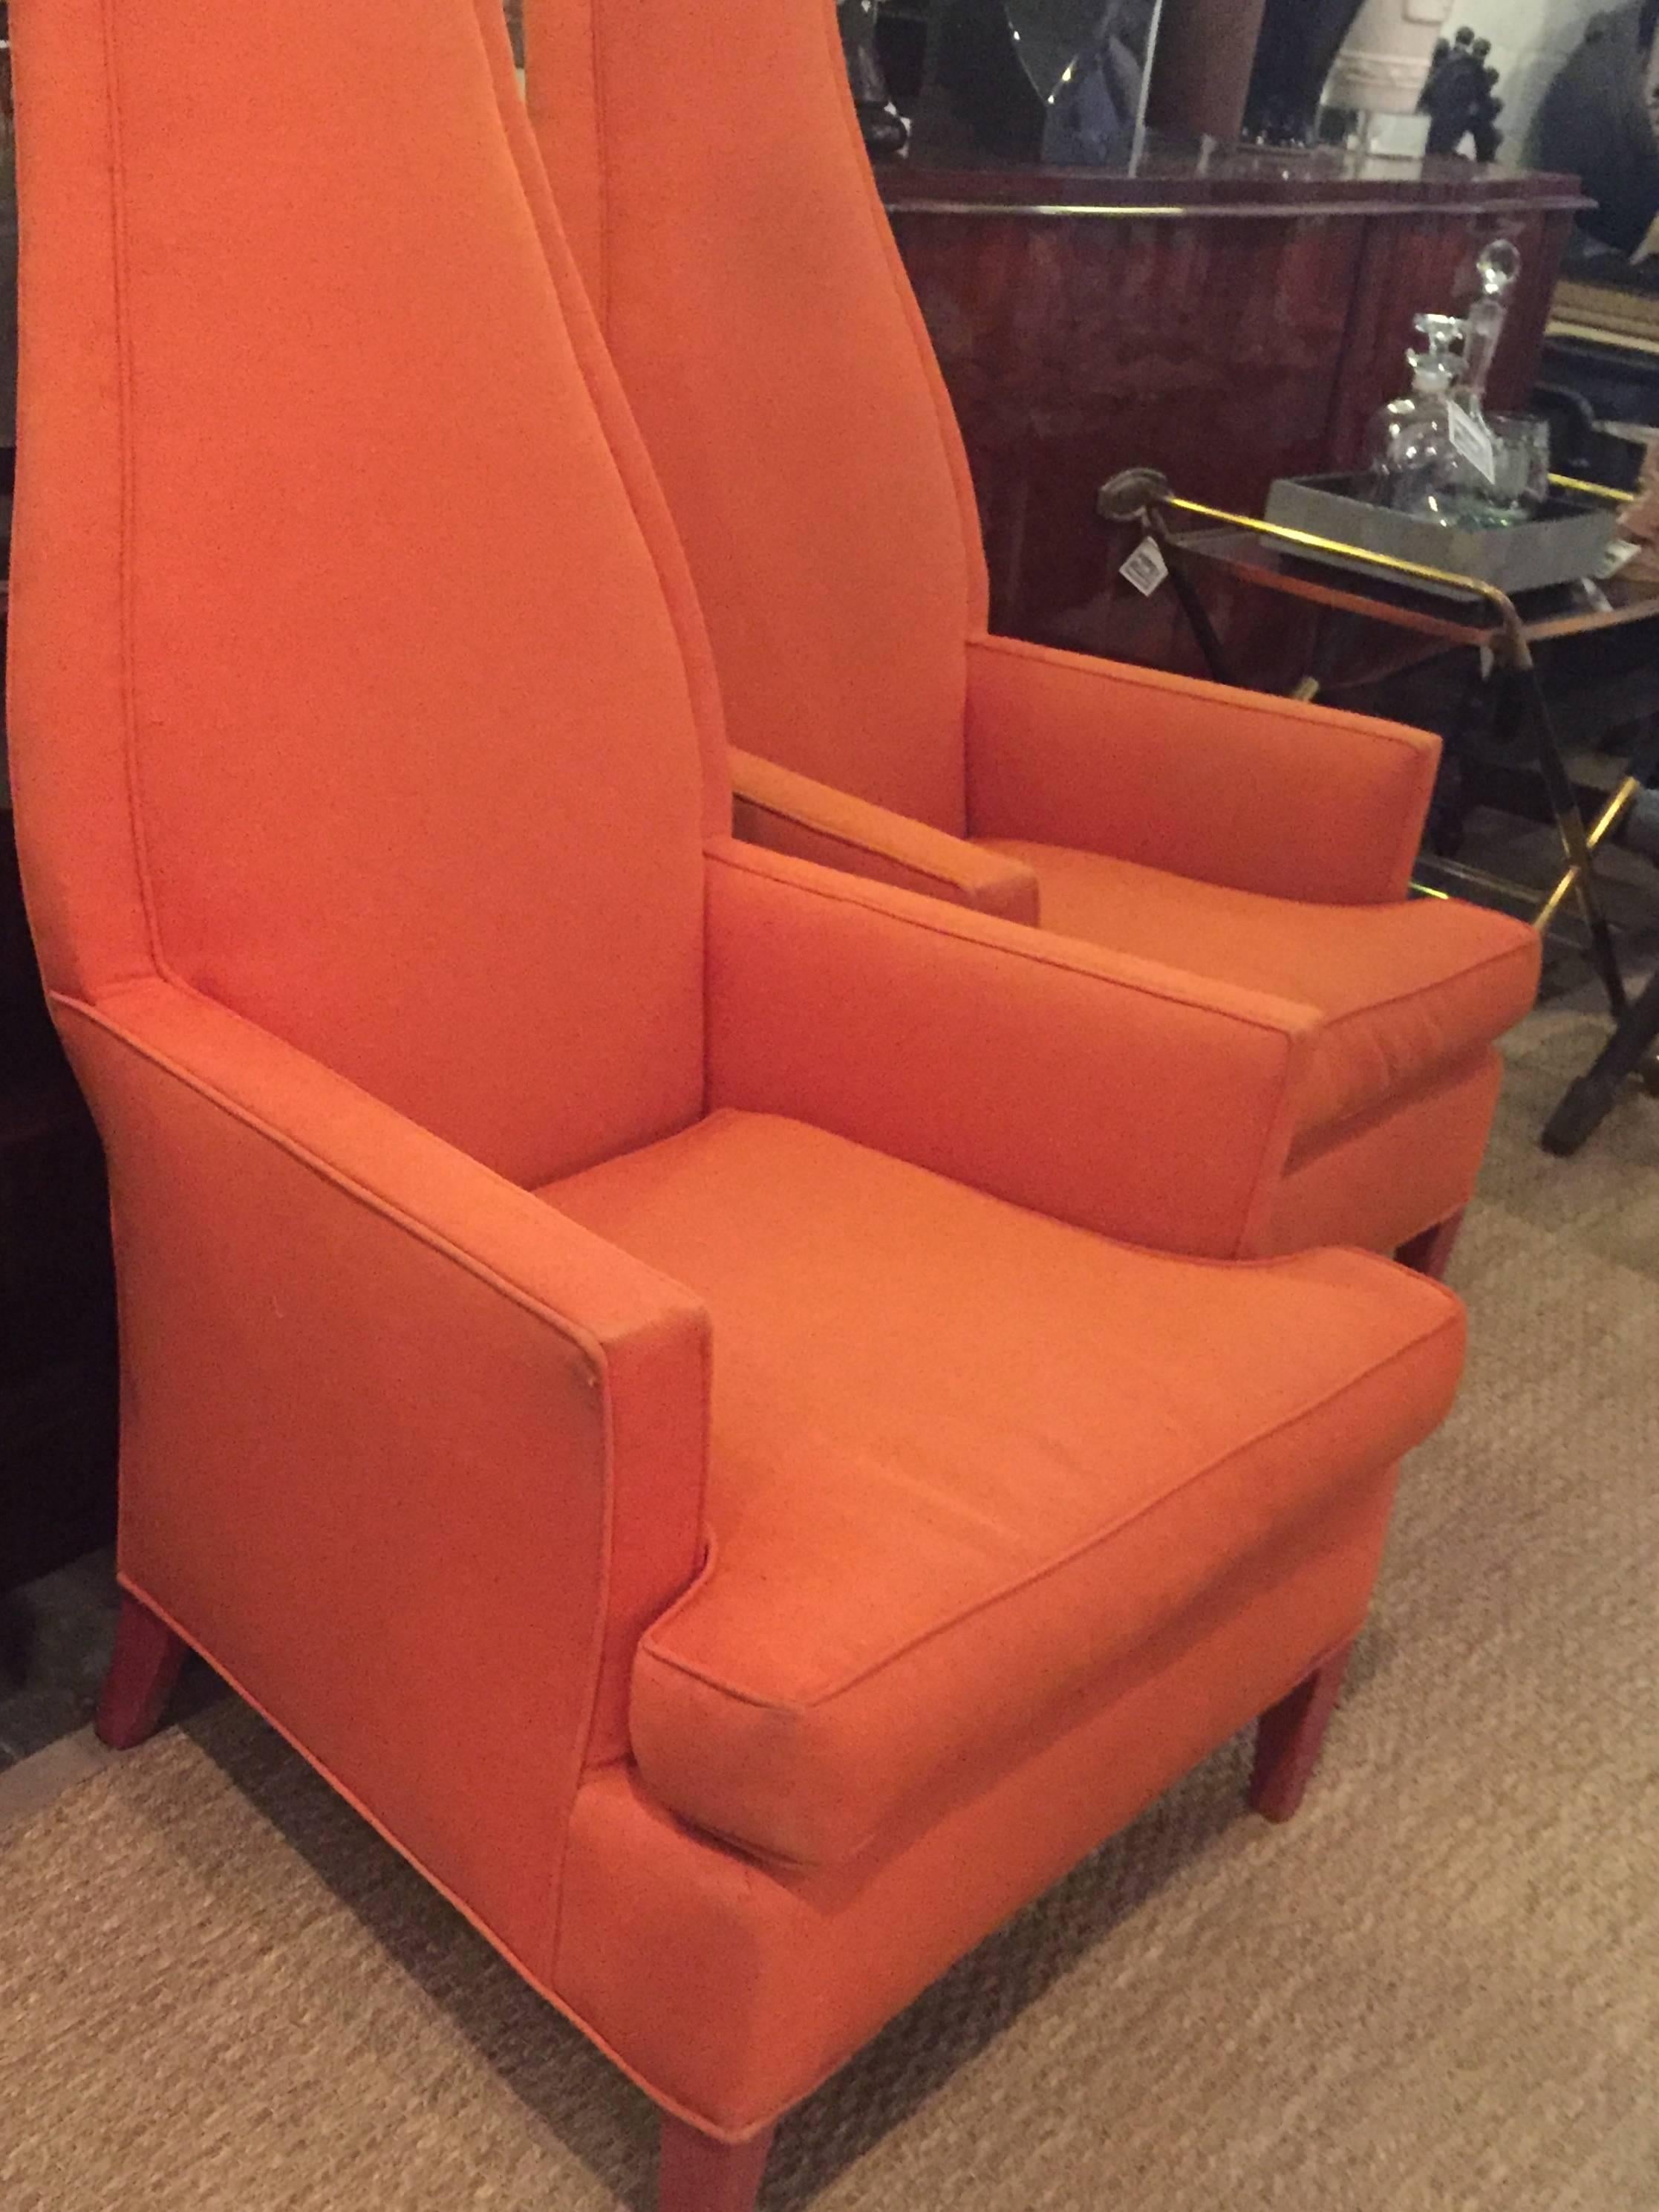 Hollywood Regency pair of upholstered chairs from the 1960s.